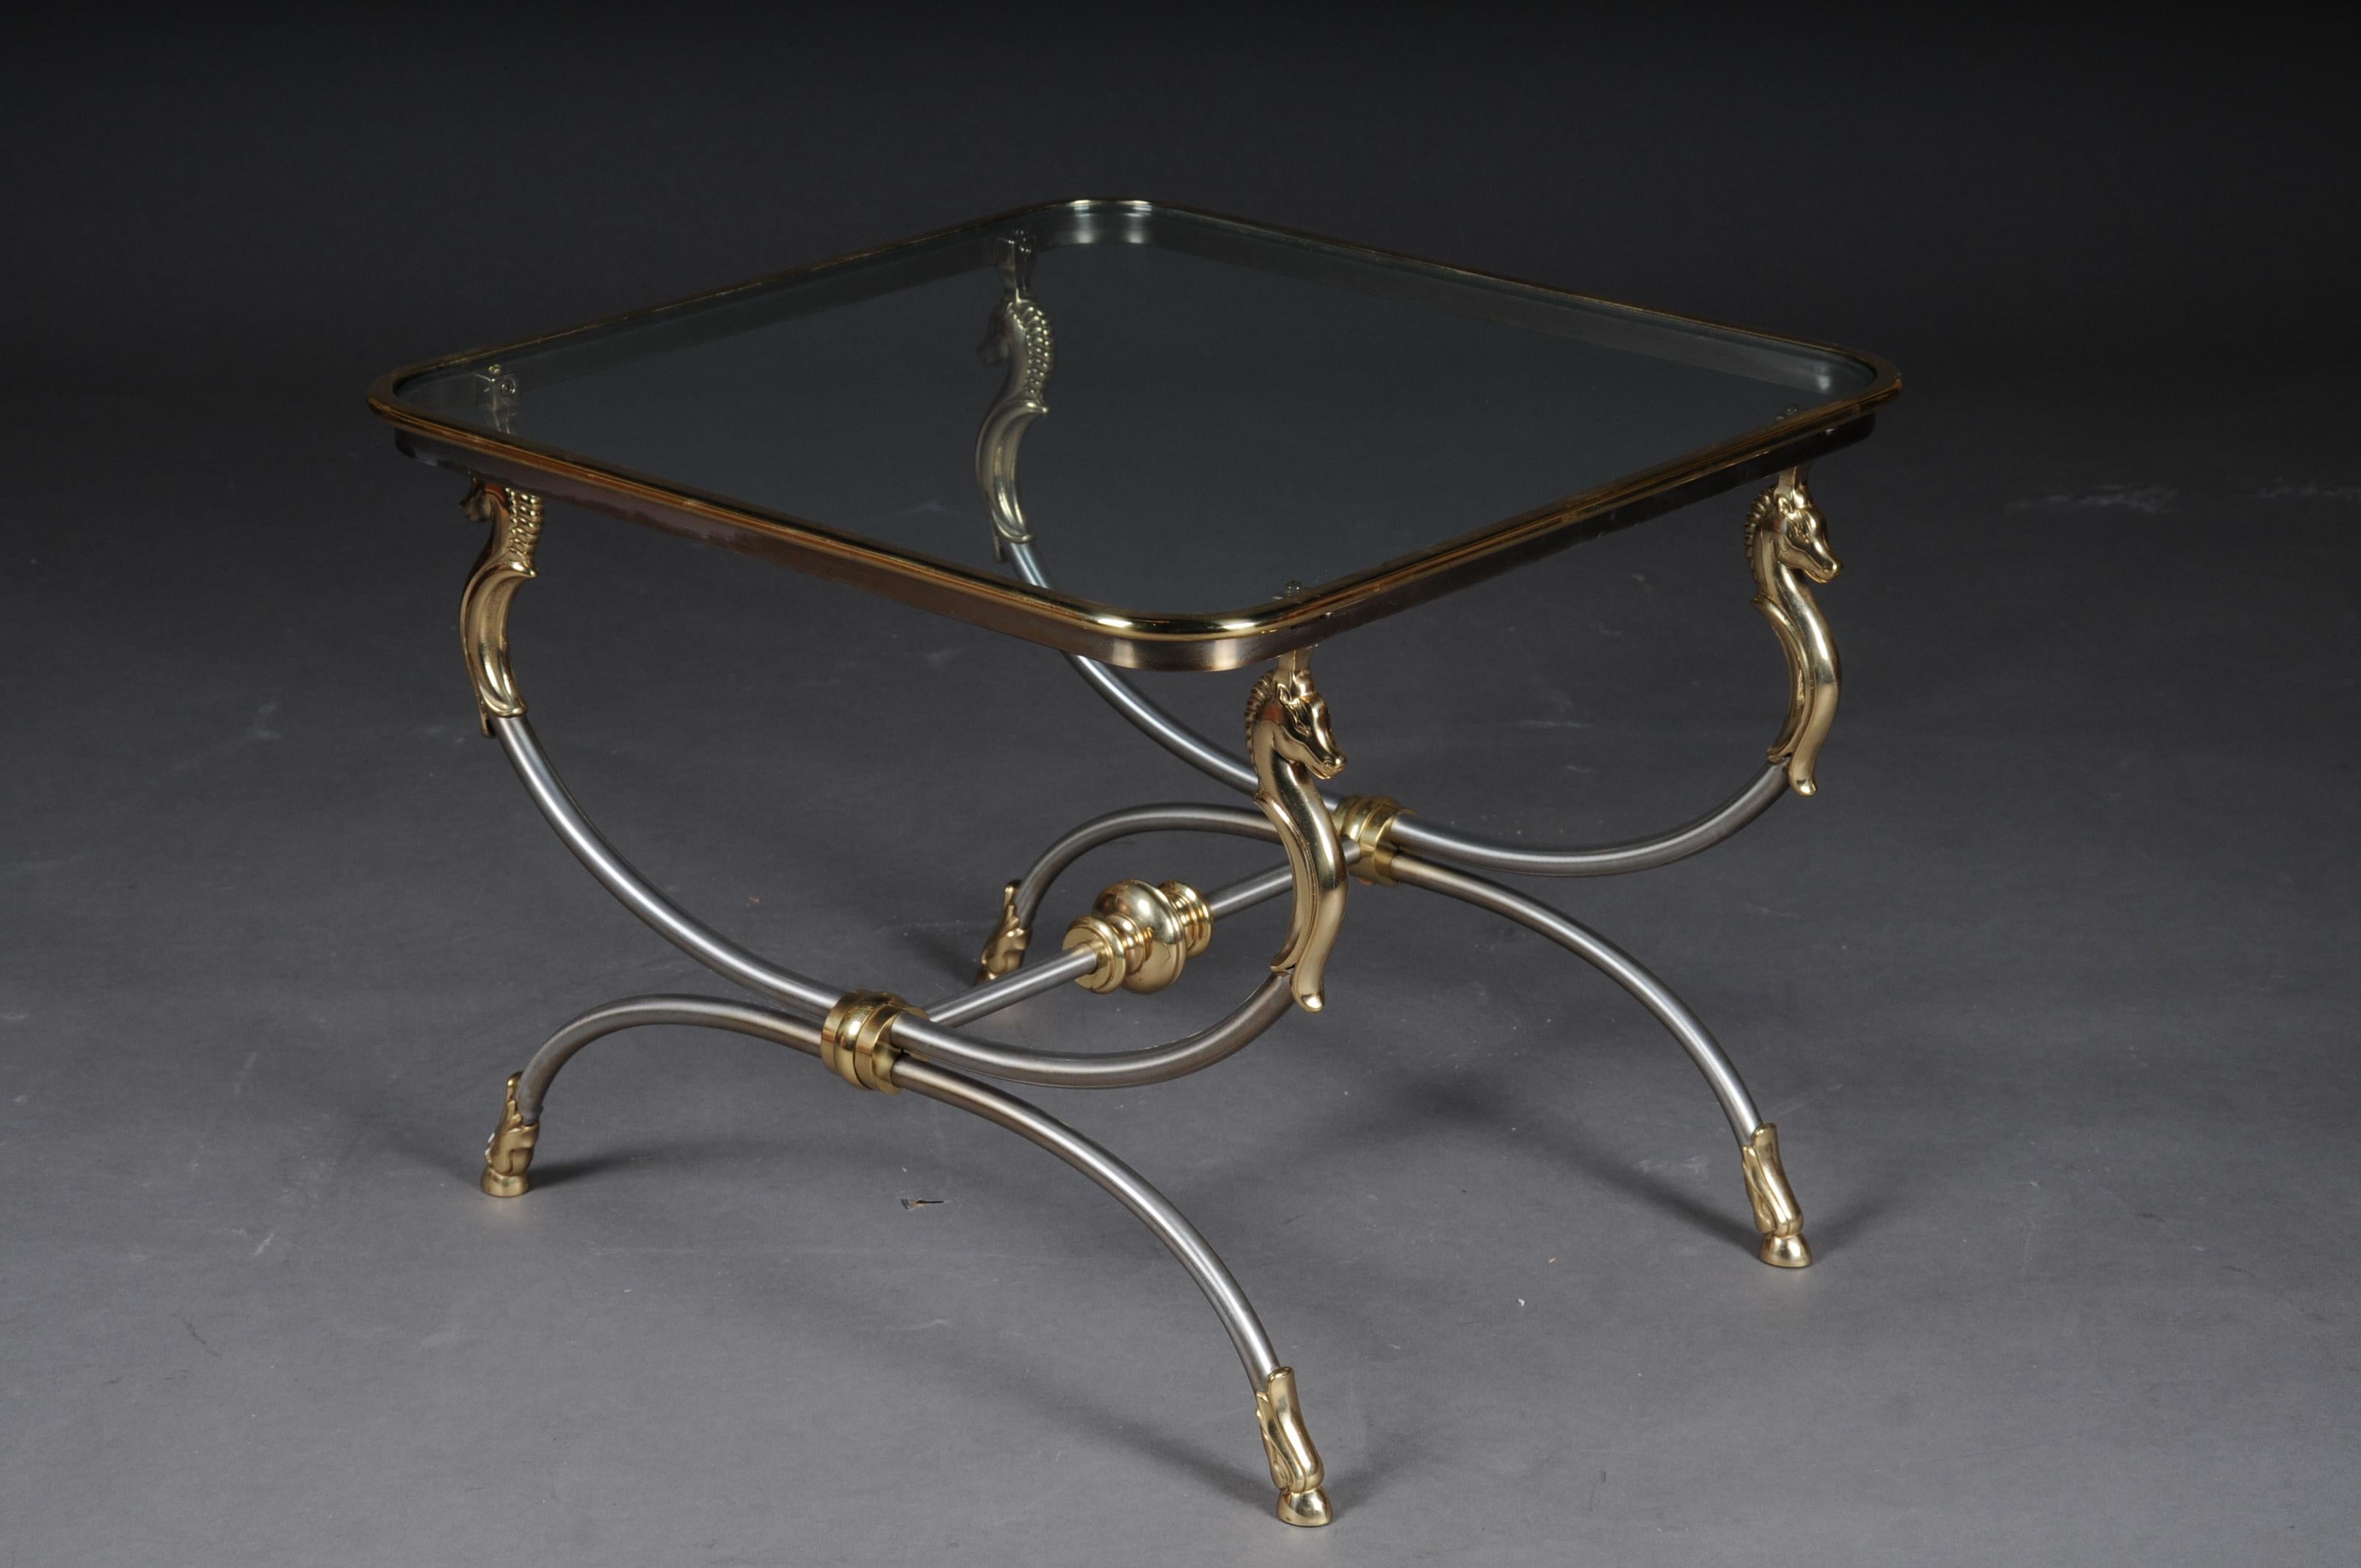 20th century modern designer side table, chrome brass, classical style

Chrome / brass frame, curved and flanked by horse busts in brass. Polished brass frame enclosed in a glass plate.